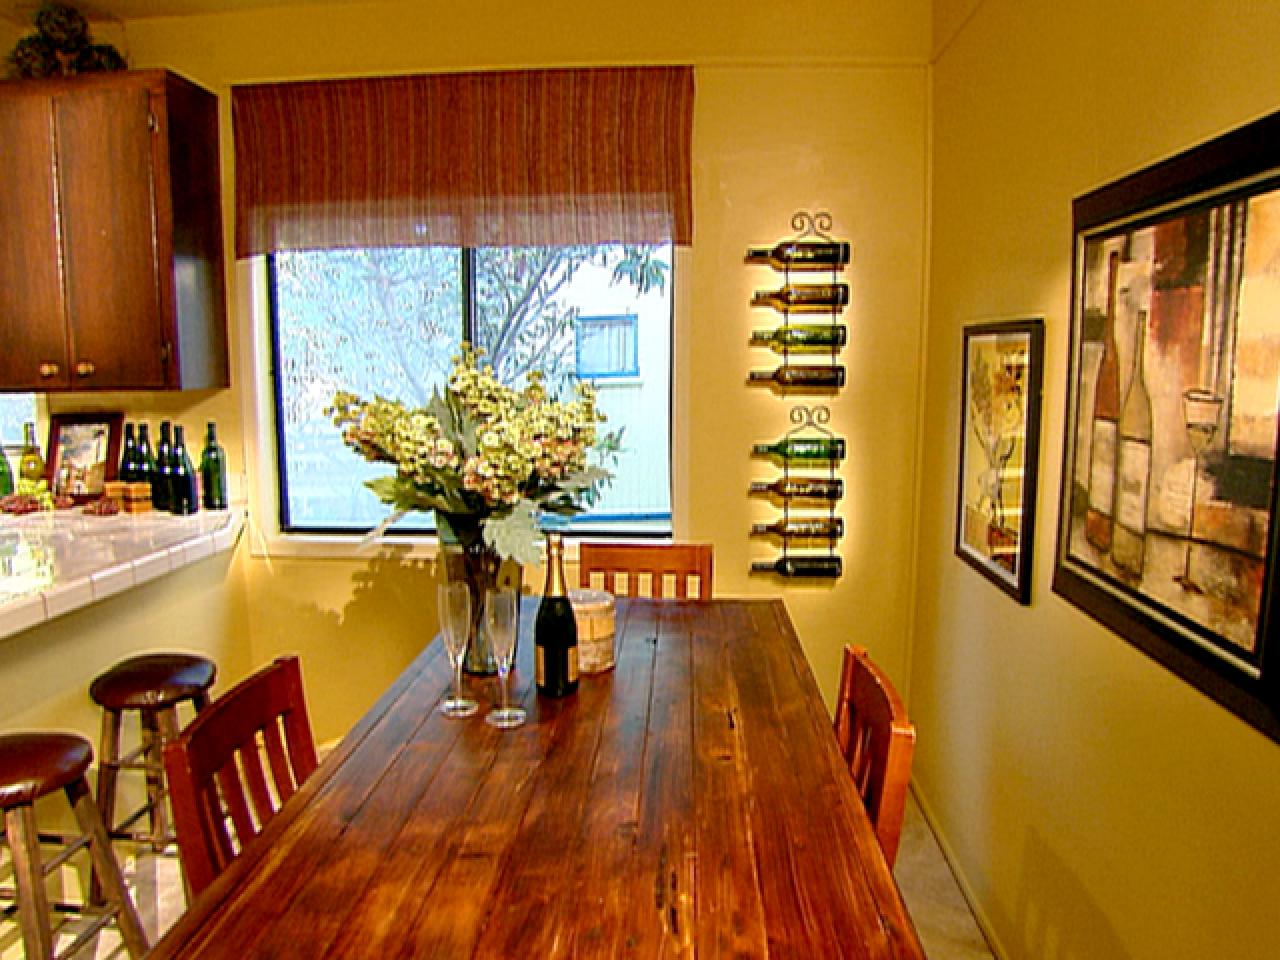 Wine Themed Kitchen Pours On The Charm Hgtv